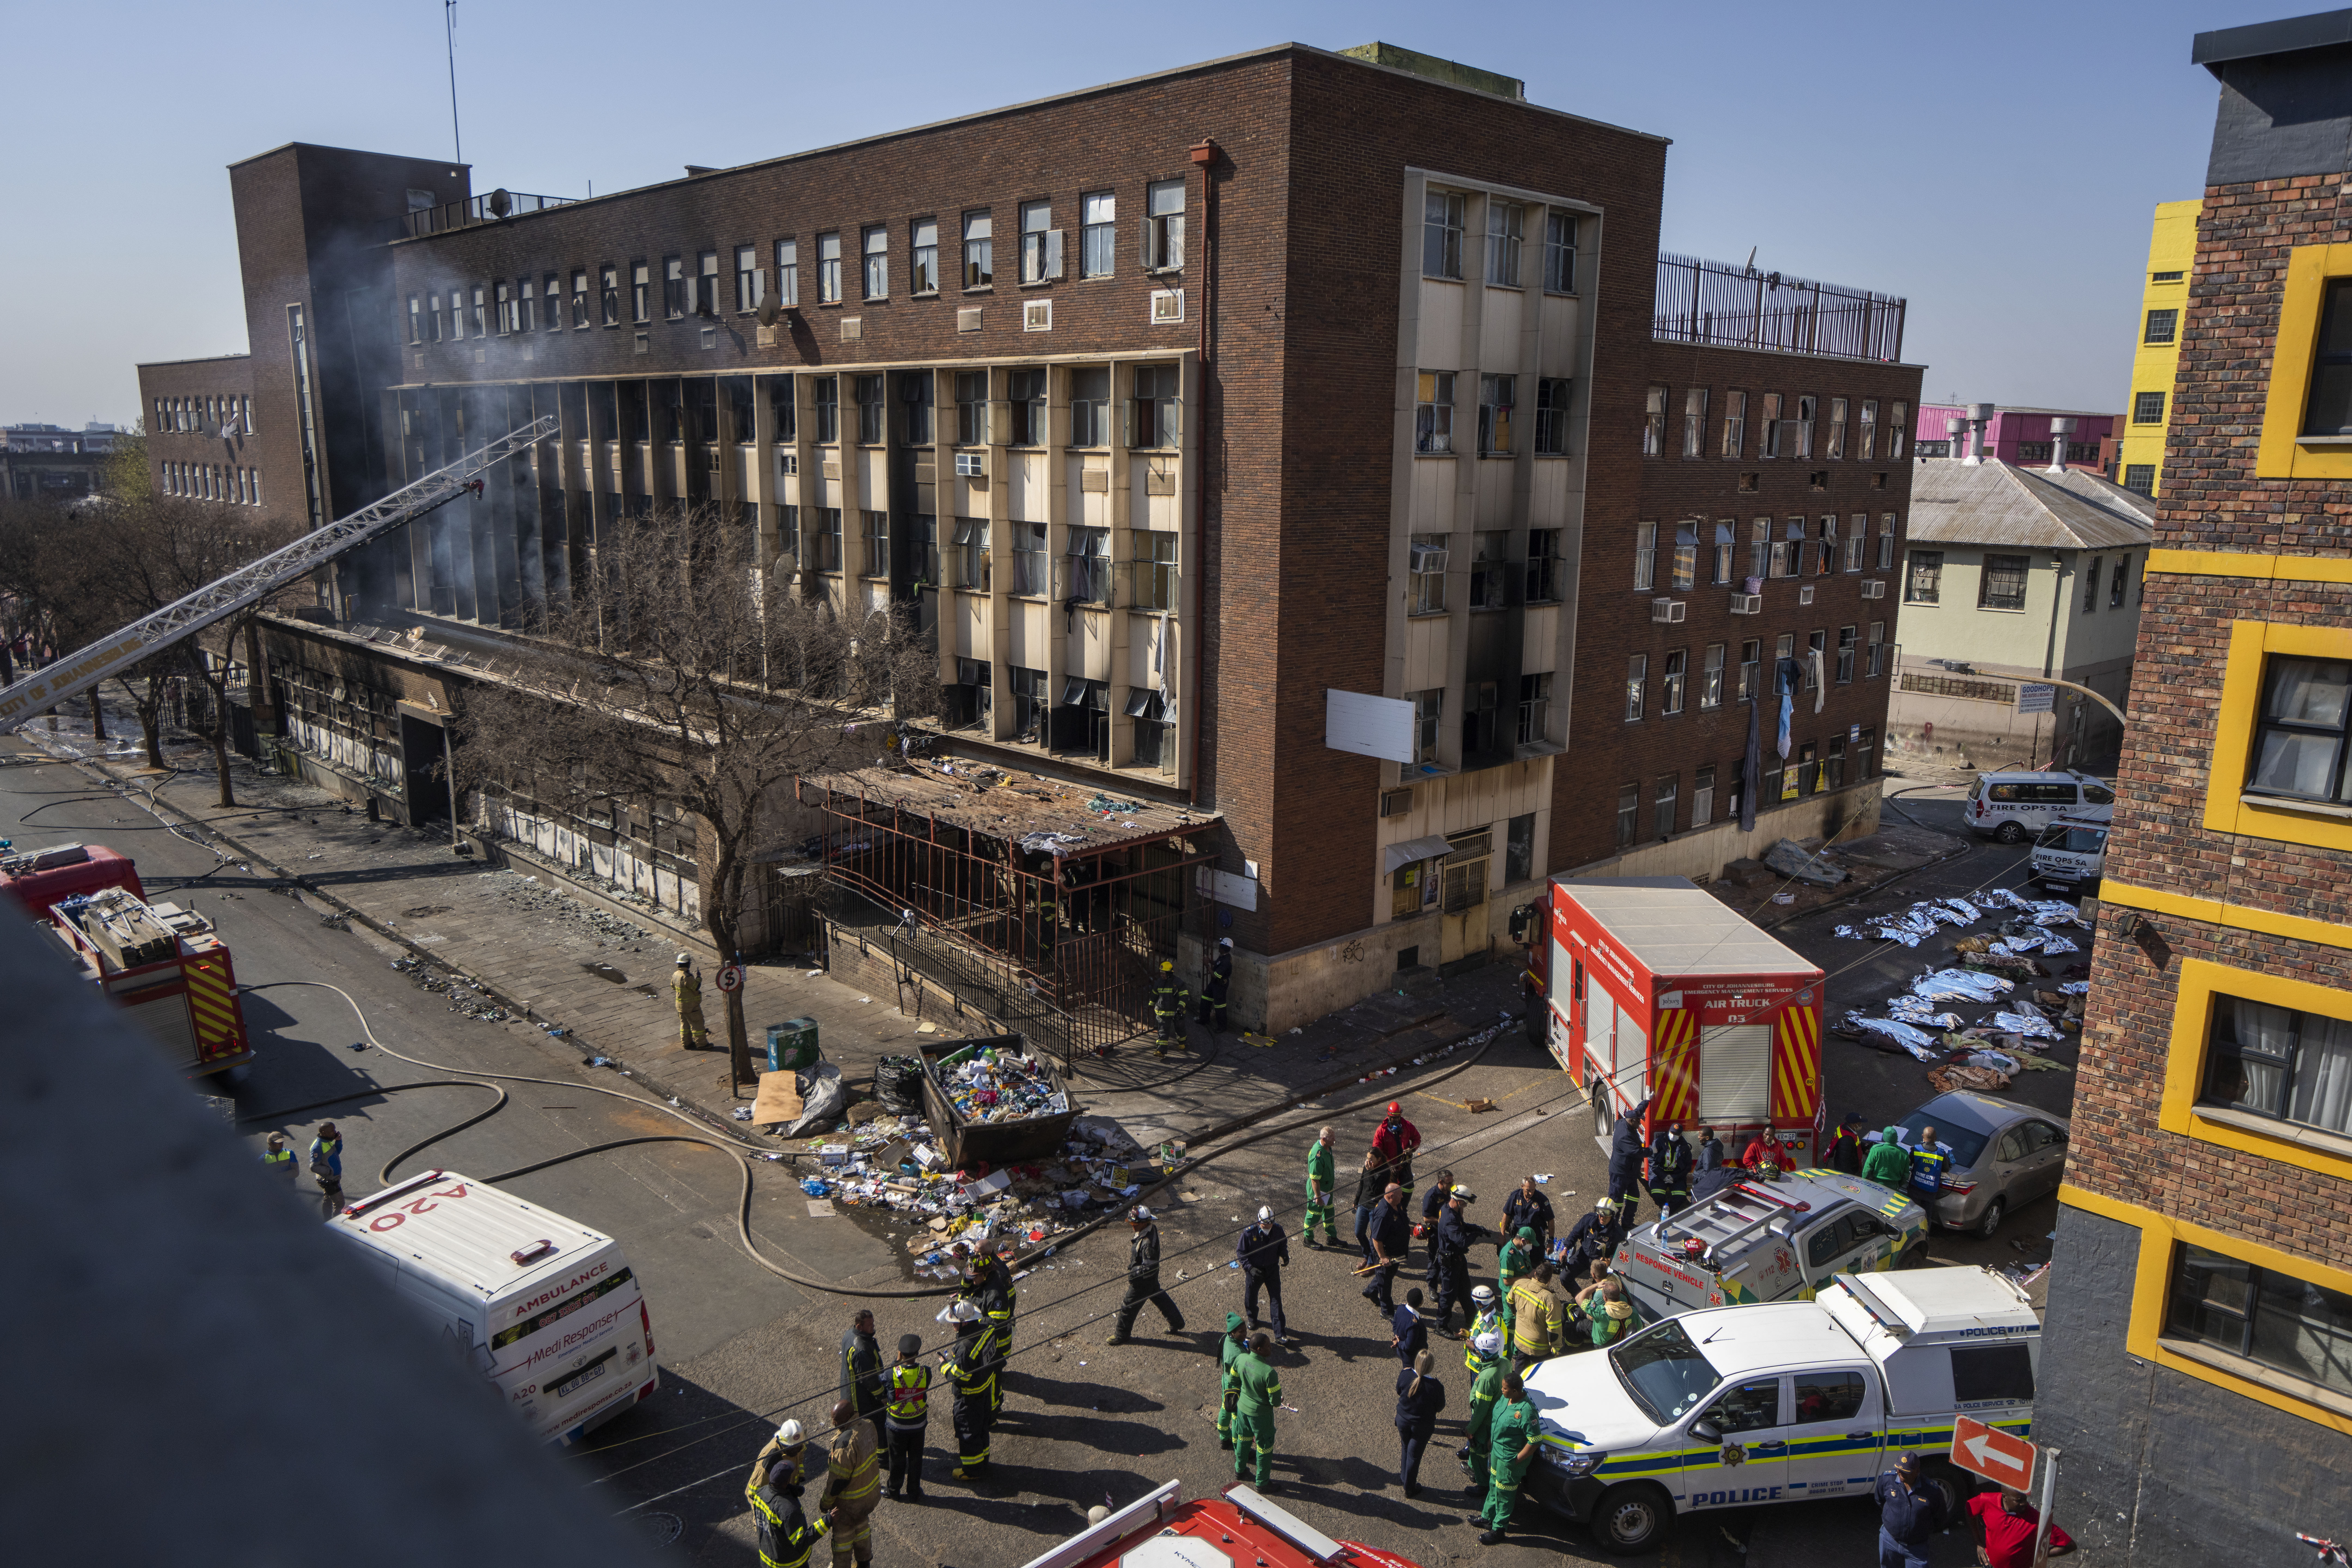 Medics and emergency workers at the scene of a deadly blaze in downtown Johannesburg, Thursday, Aug. 31, 2023. Dozens died when a fire ripped through a multi-story building in Johannesburg, South Africa's biggest city, emergency services said Thursday. Photo credit: Jerome Delay, The Associated Press